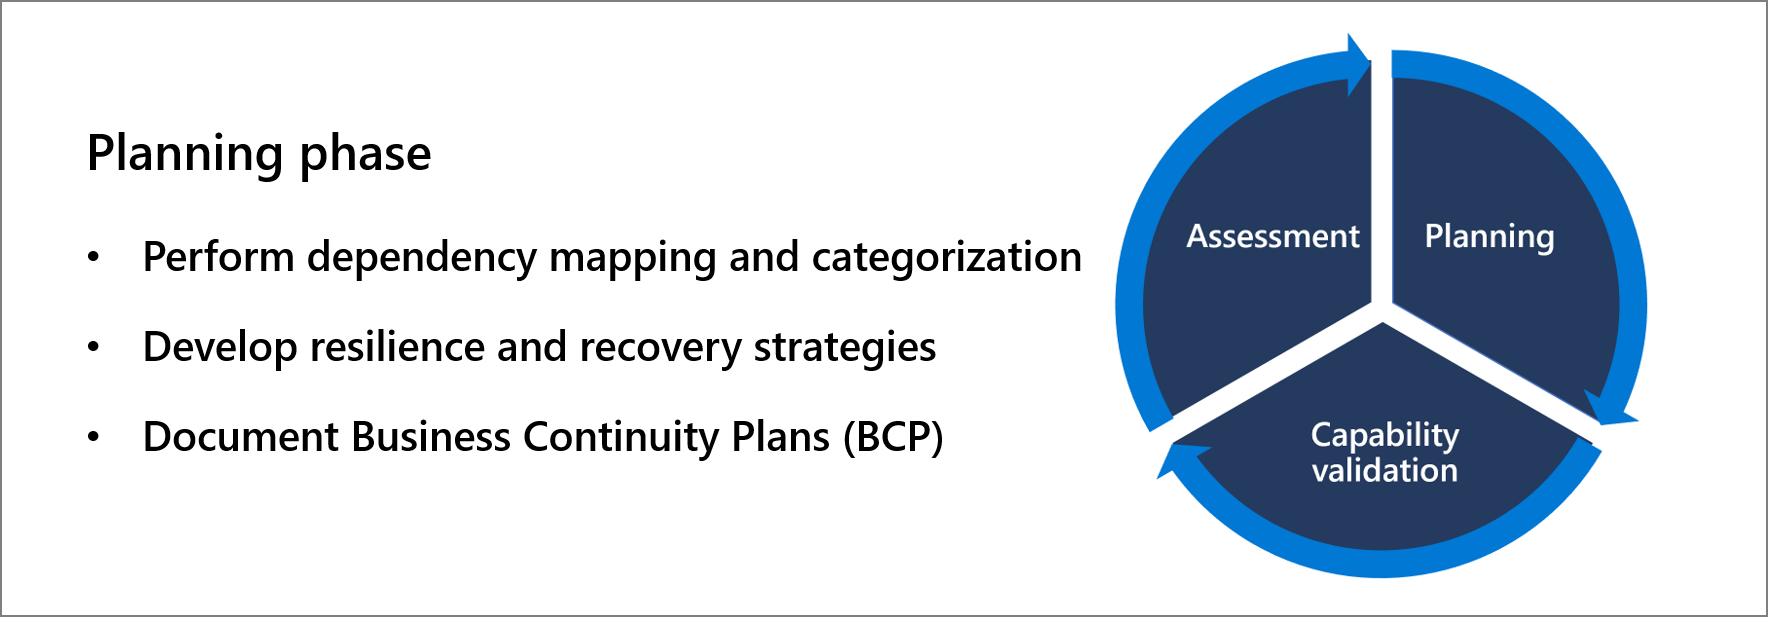 Planning phase: - perform dependency mapping and categorization, - develop resilience and recovery strategies, - document business continuity plans 